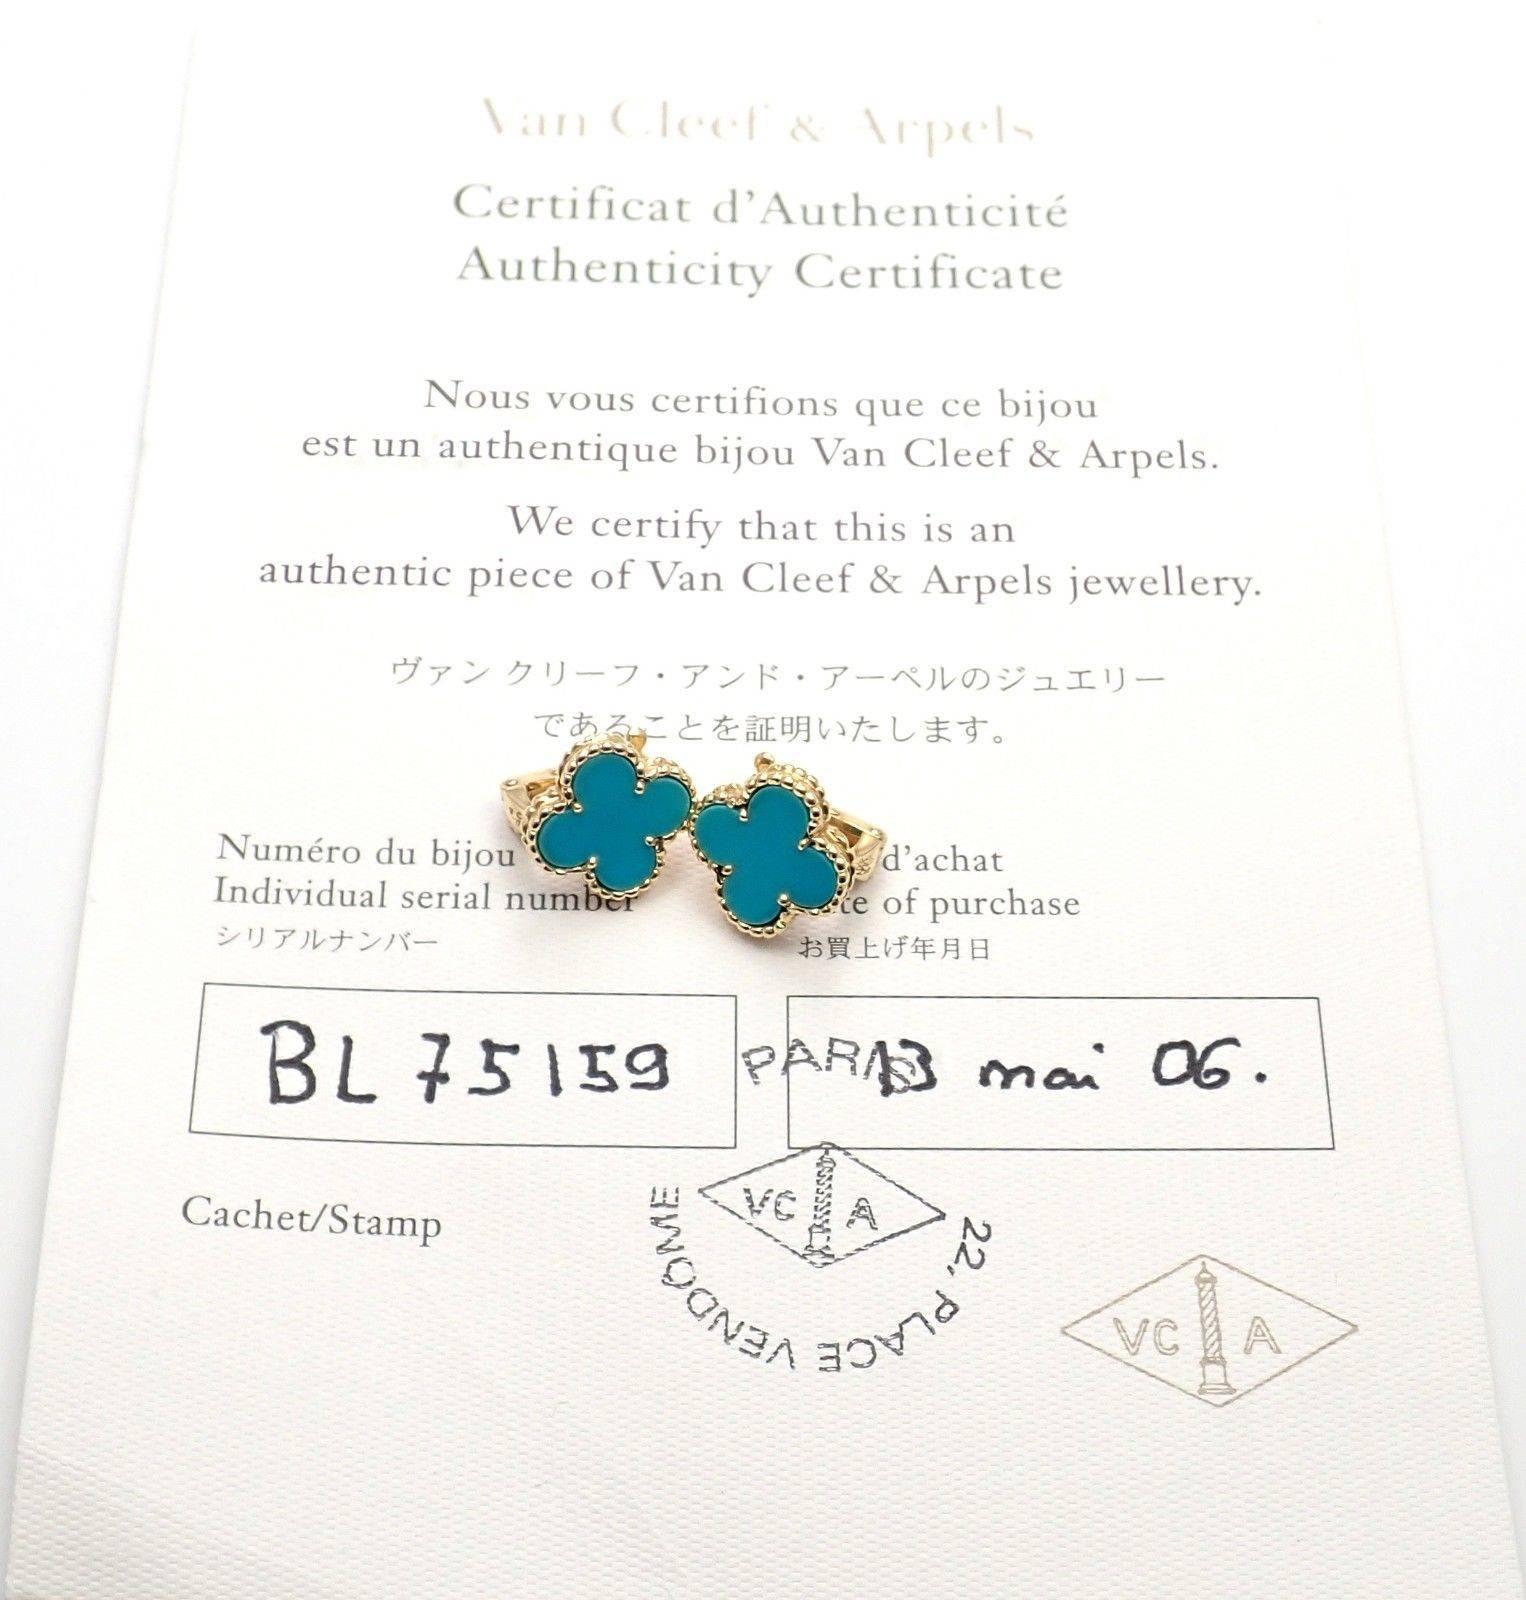 18k Yellow Gold Vintage Alhambra Turquoise Earrings by Van Cleef & Arpels.  
With 2 motifs of turquoise alhambra shape stones: 15mm each. 
These earrings come with a certificate from Van Cleef & Arpels store.
Details:  
Measurements: 15mm x 15mm